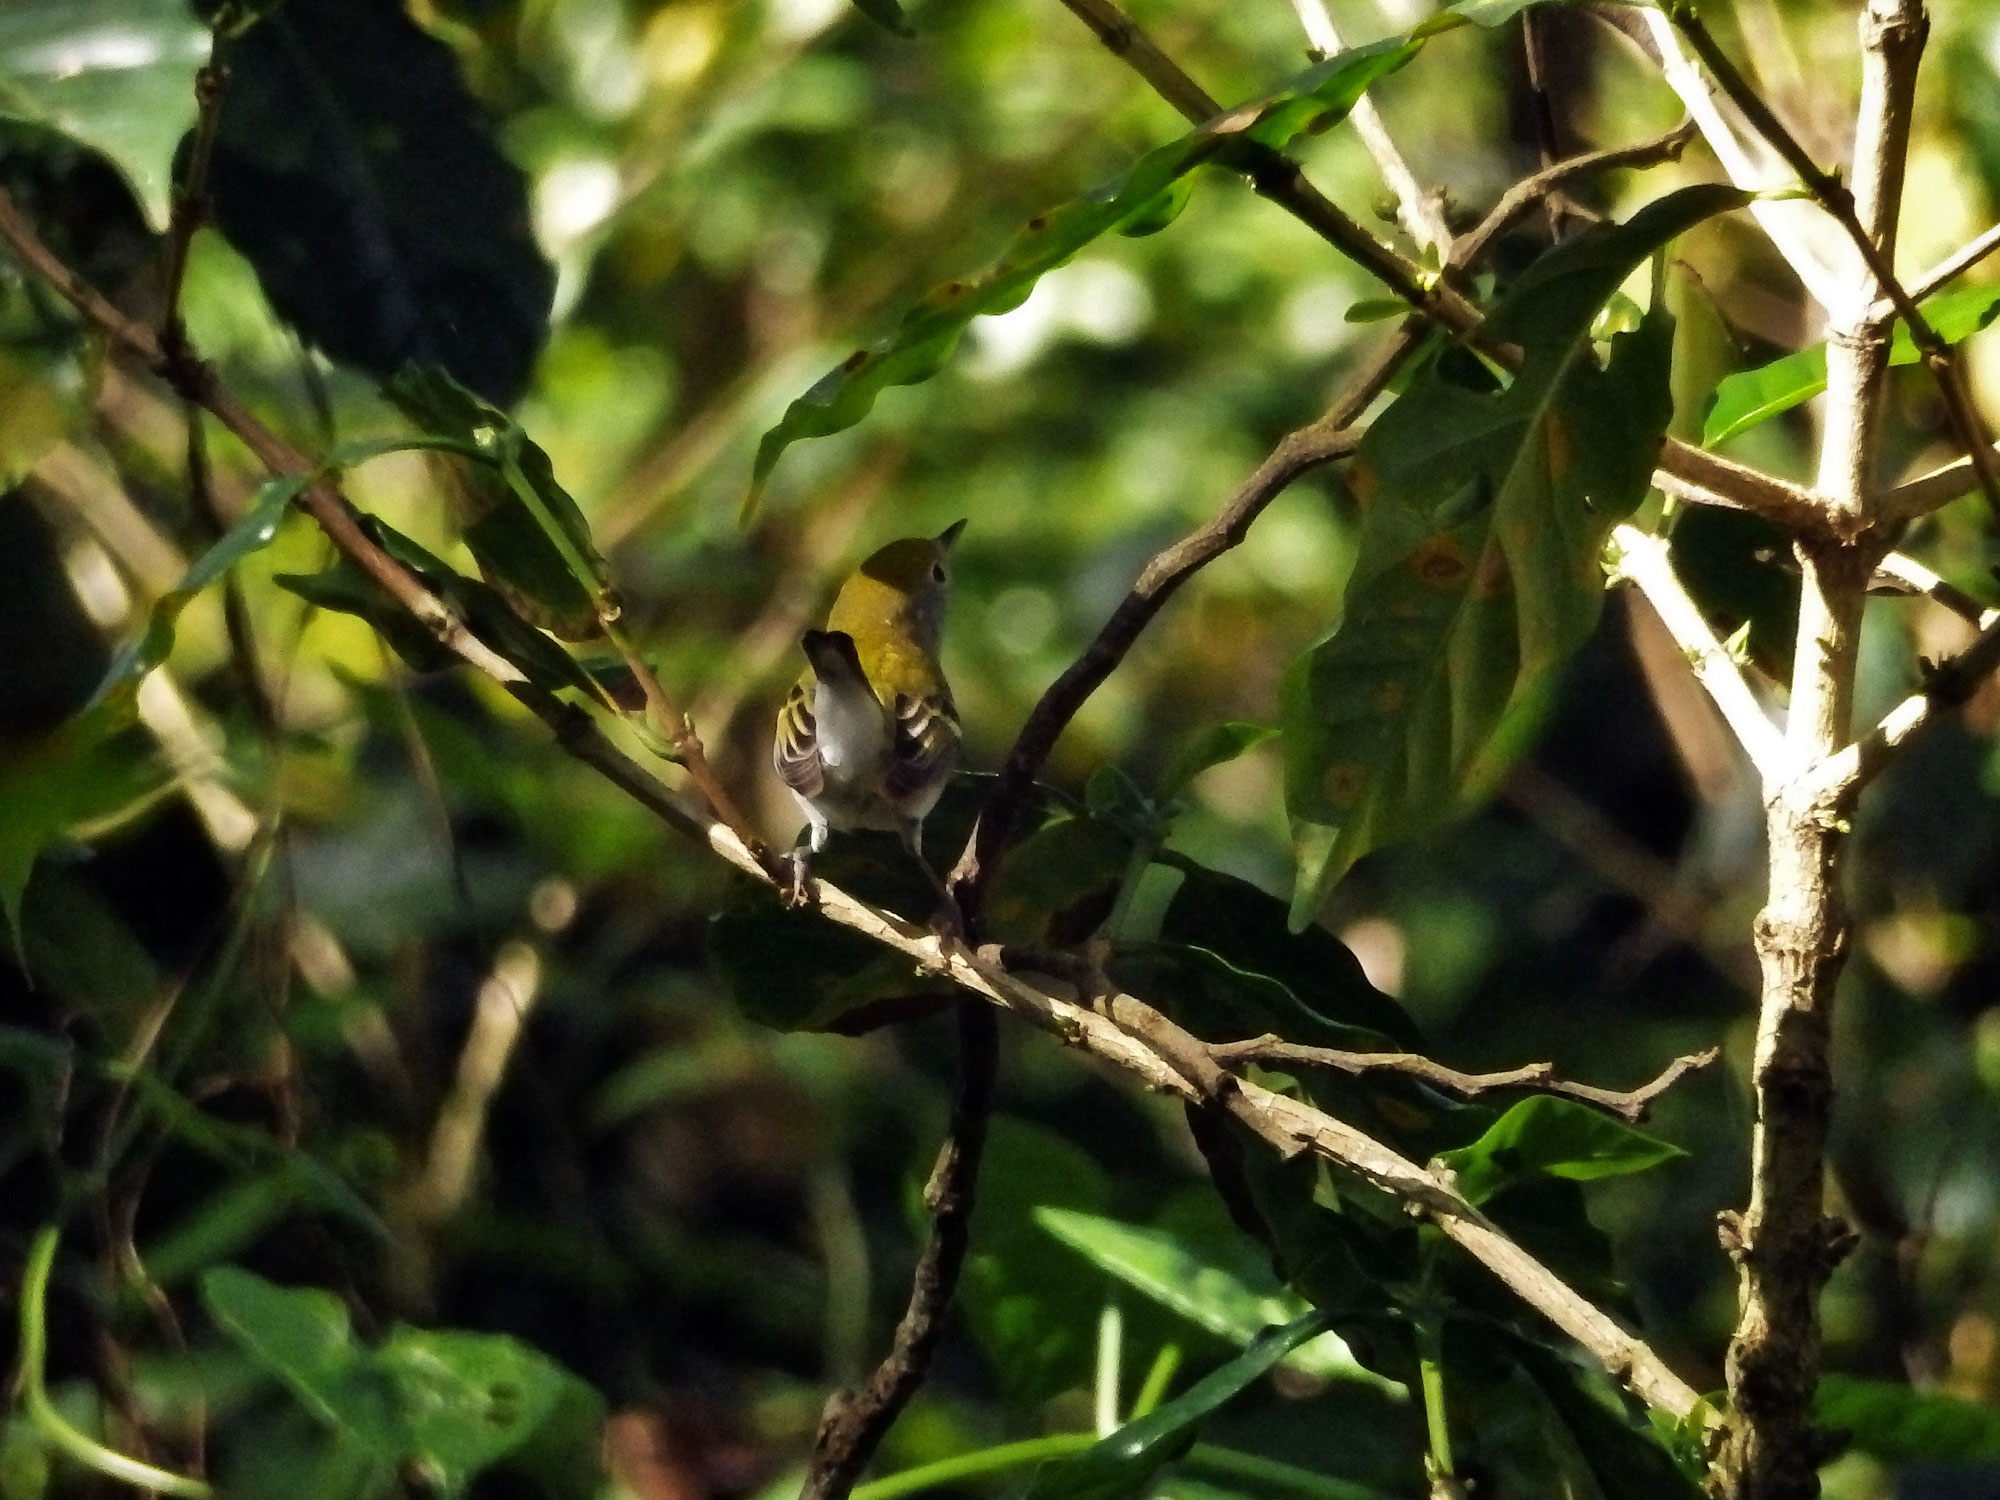 small olive-backed bird on branch in coffee shrub